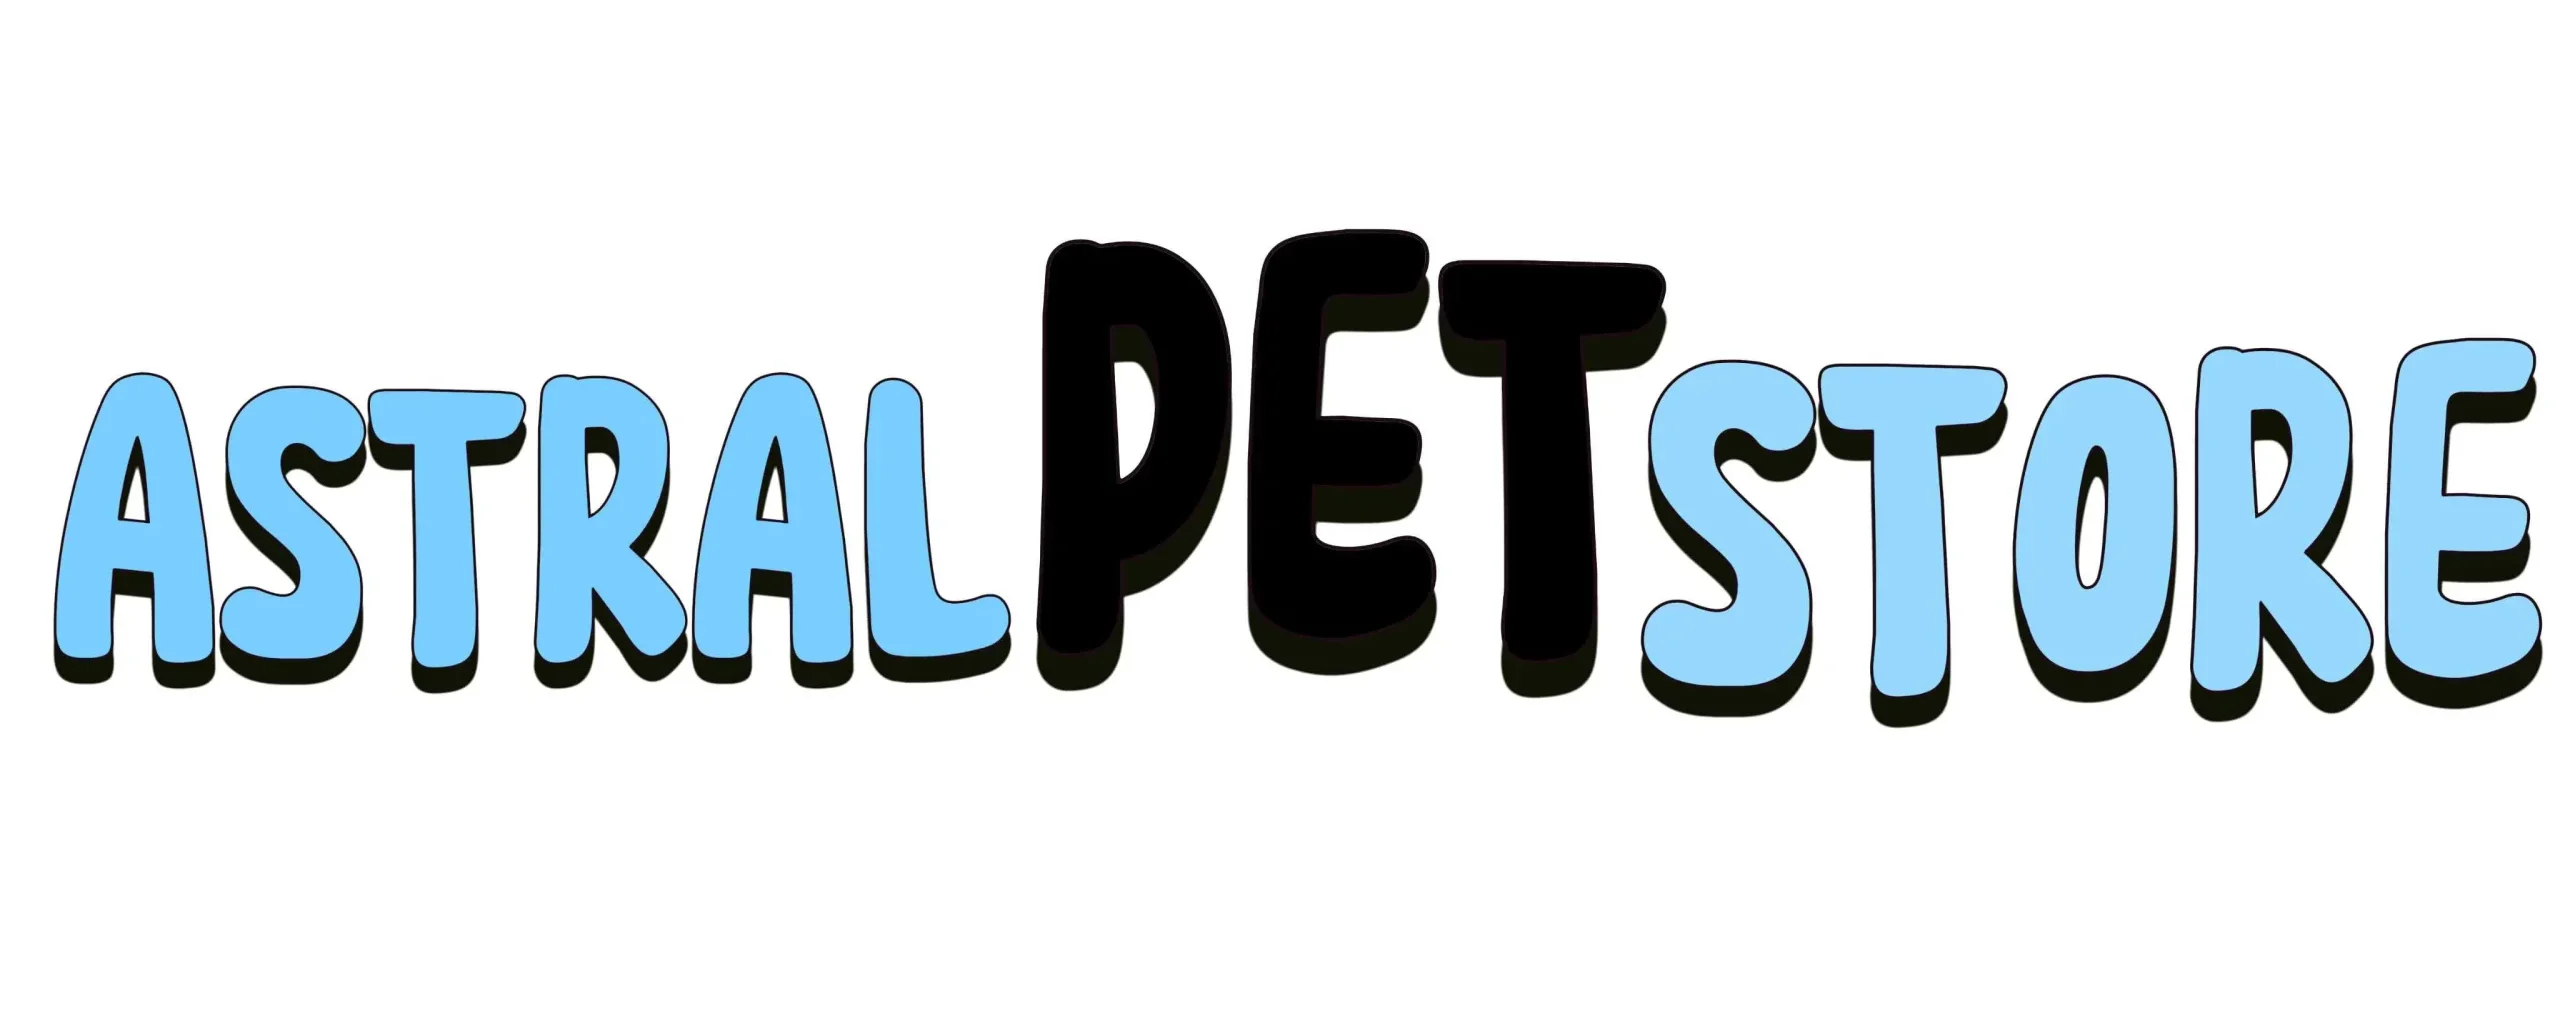 astral-pet-store-logo